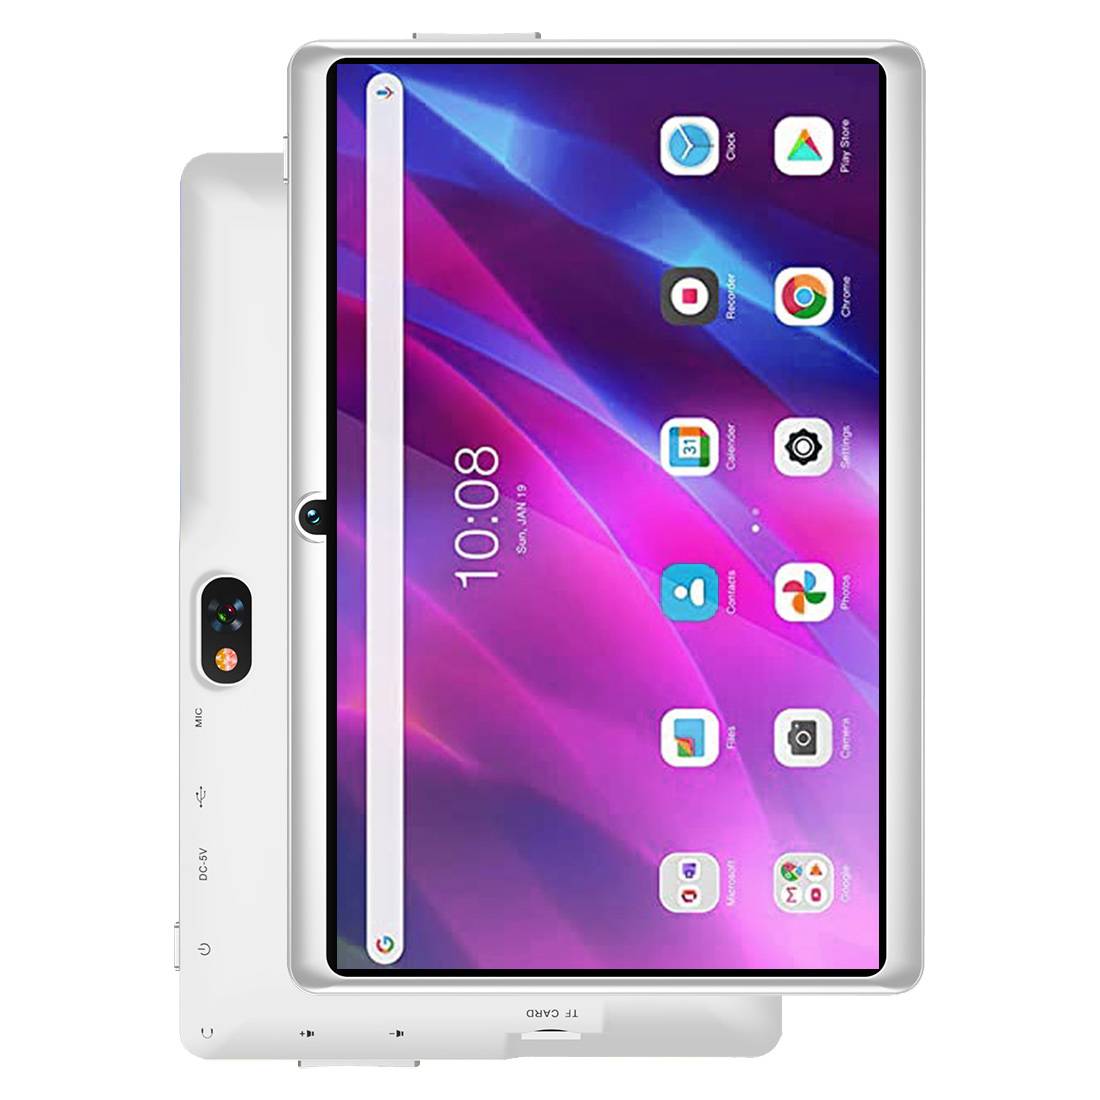 android tablet 7 inch features